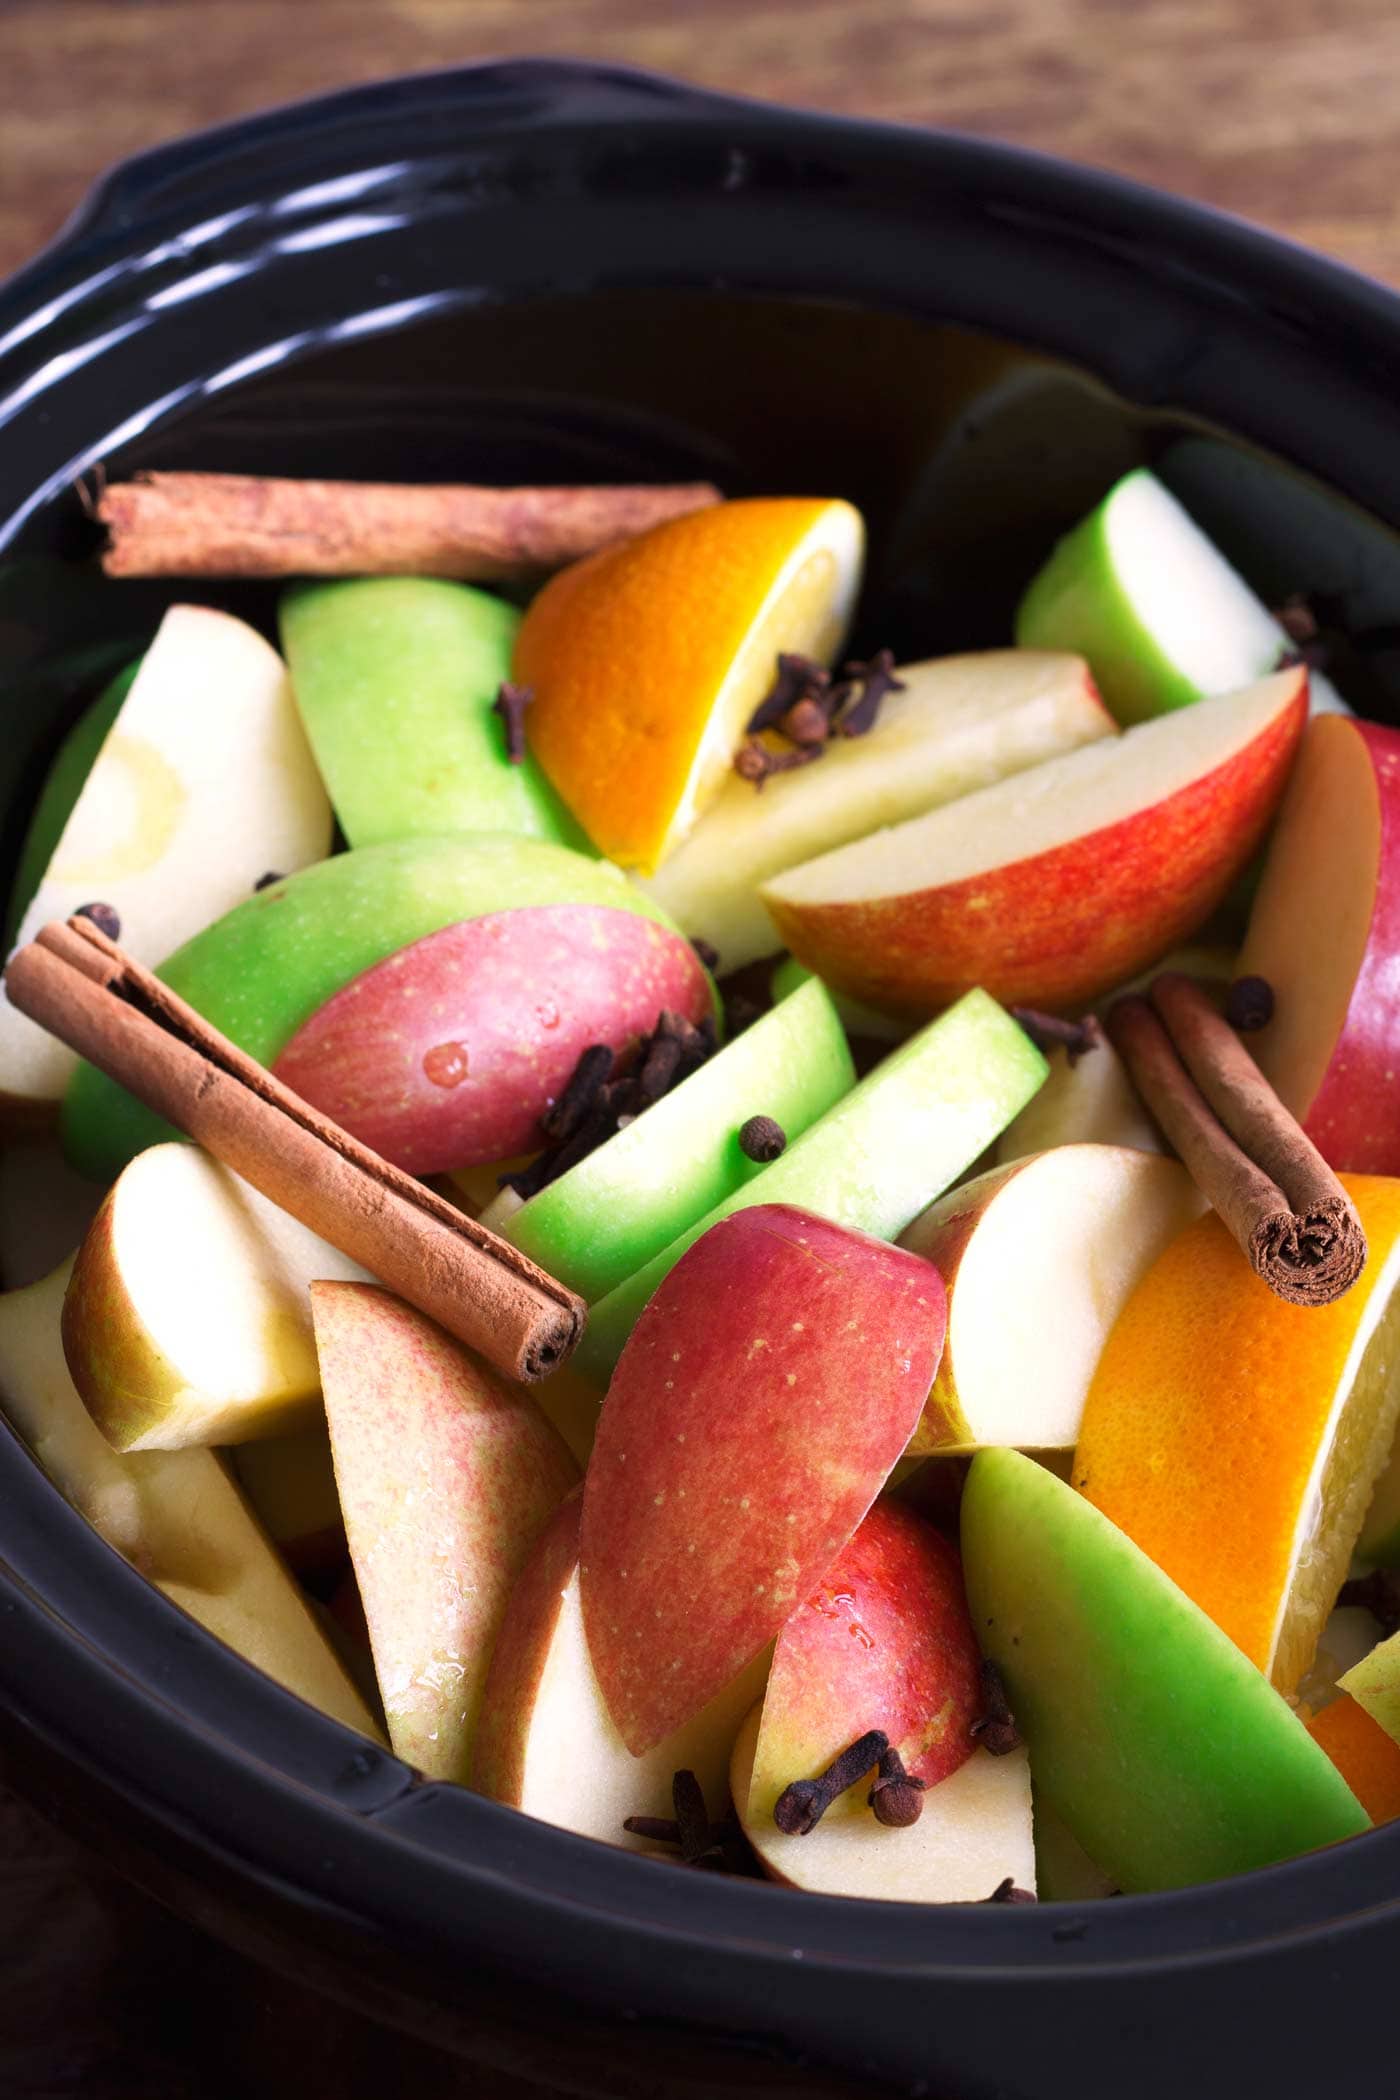 Easy to make and great for a party! This Crock-Pot apple cider is so simple to make in your slow cooker. It's paleo and can be made low carb and keto!